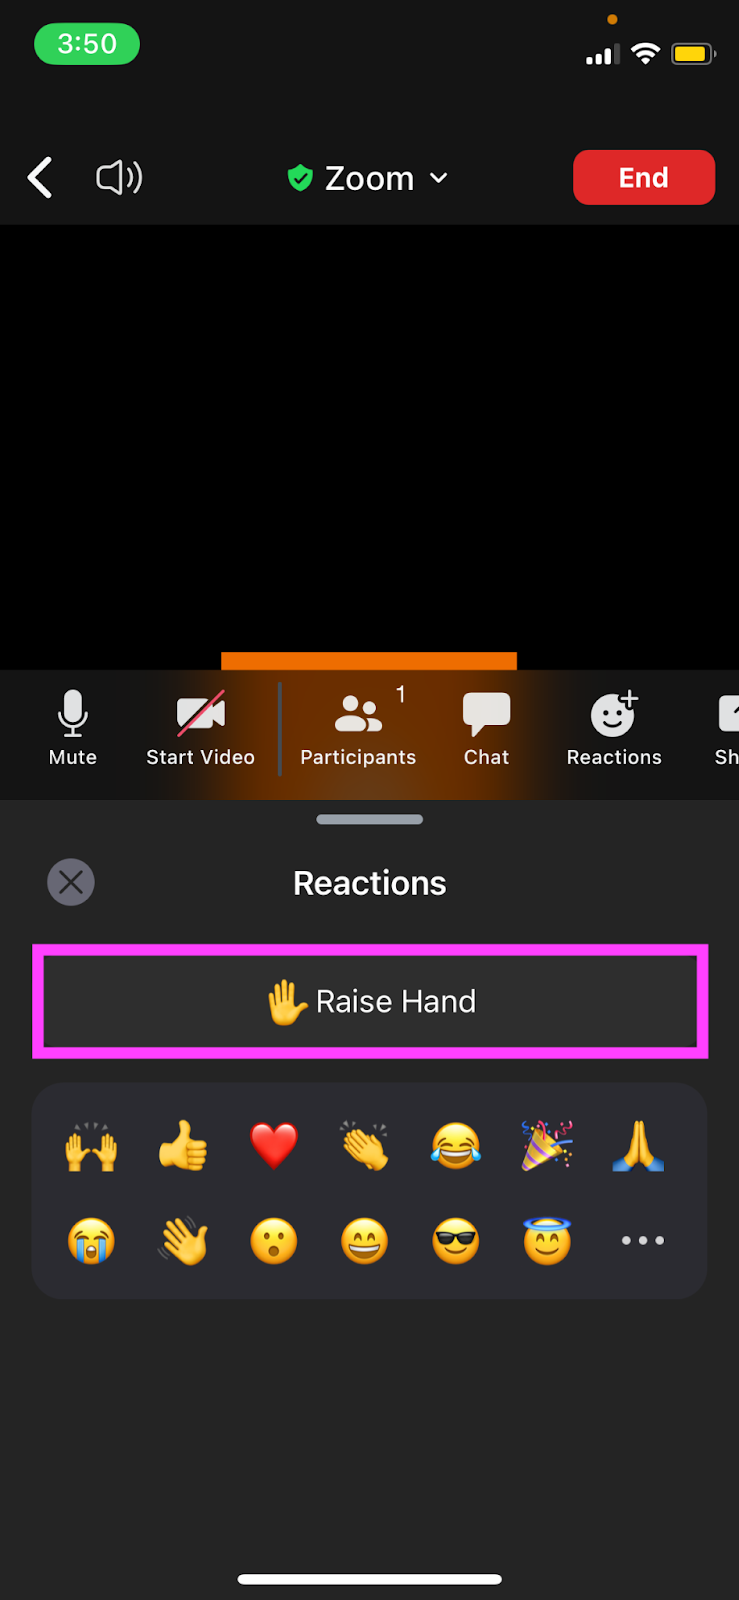 How to raise your hand in Zoom on mobile - Tap on Raise Hand